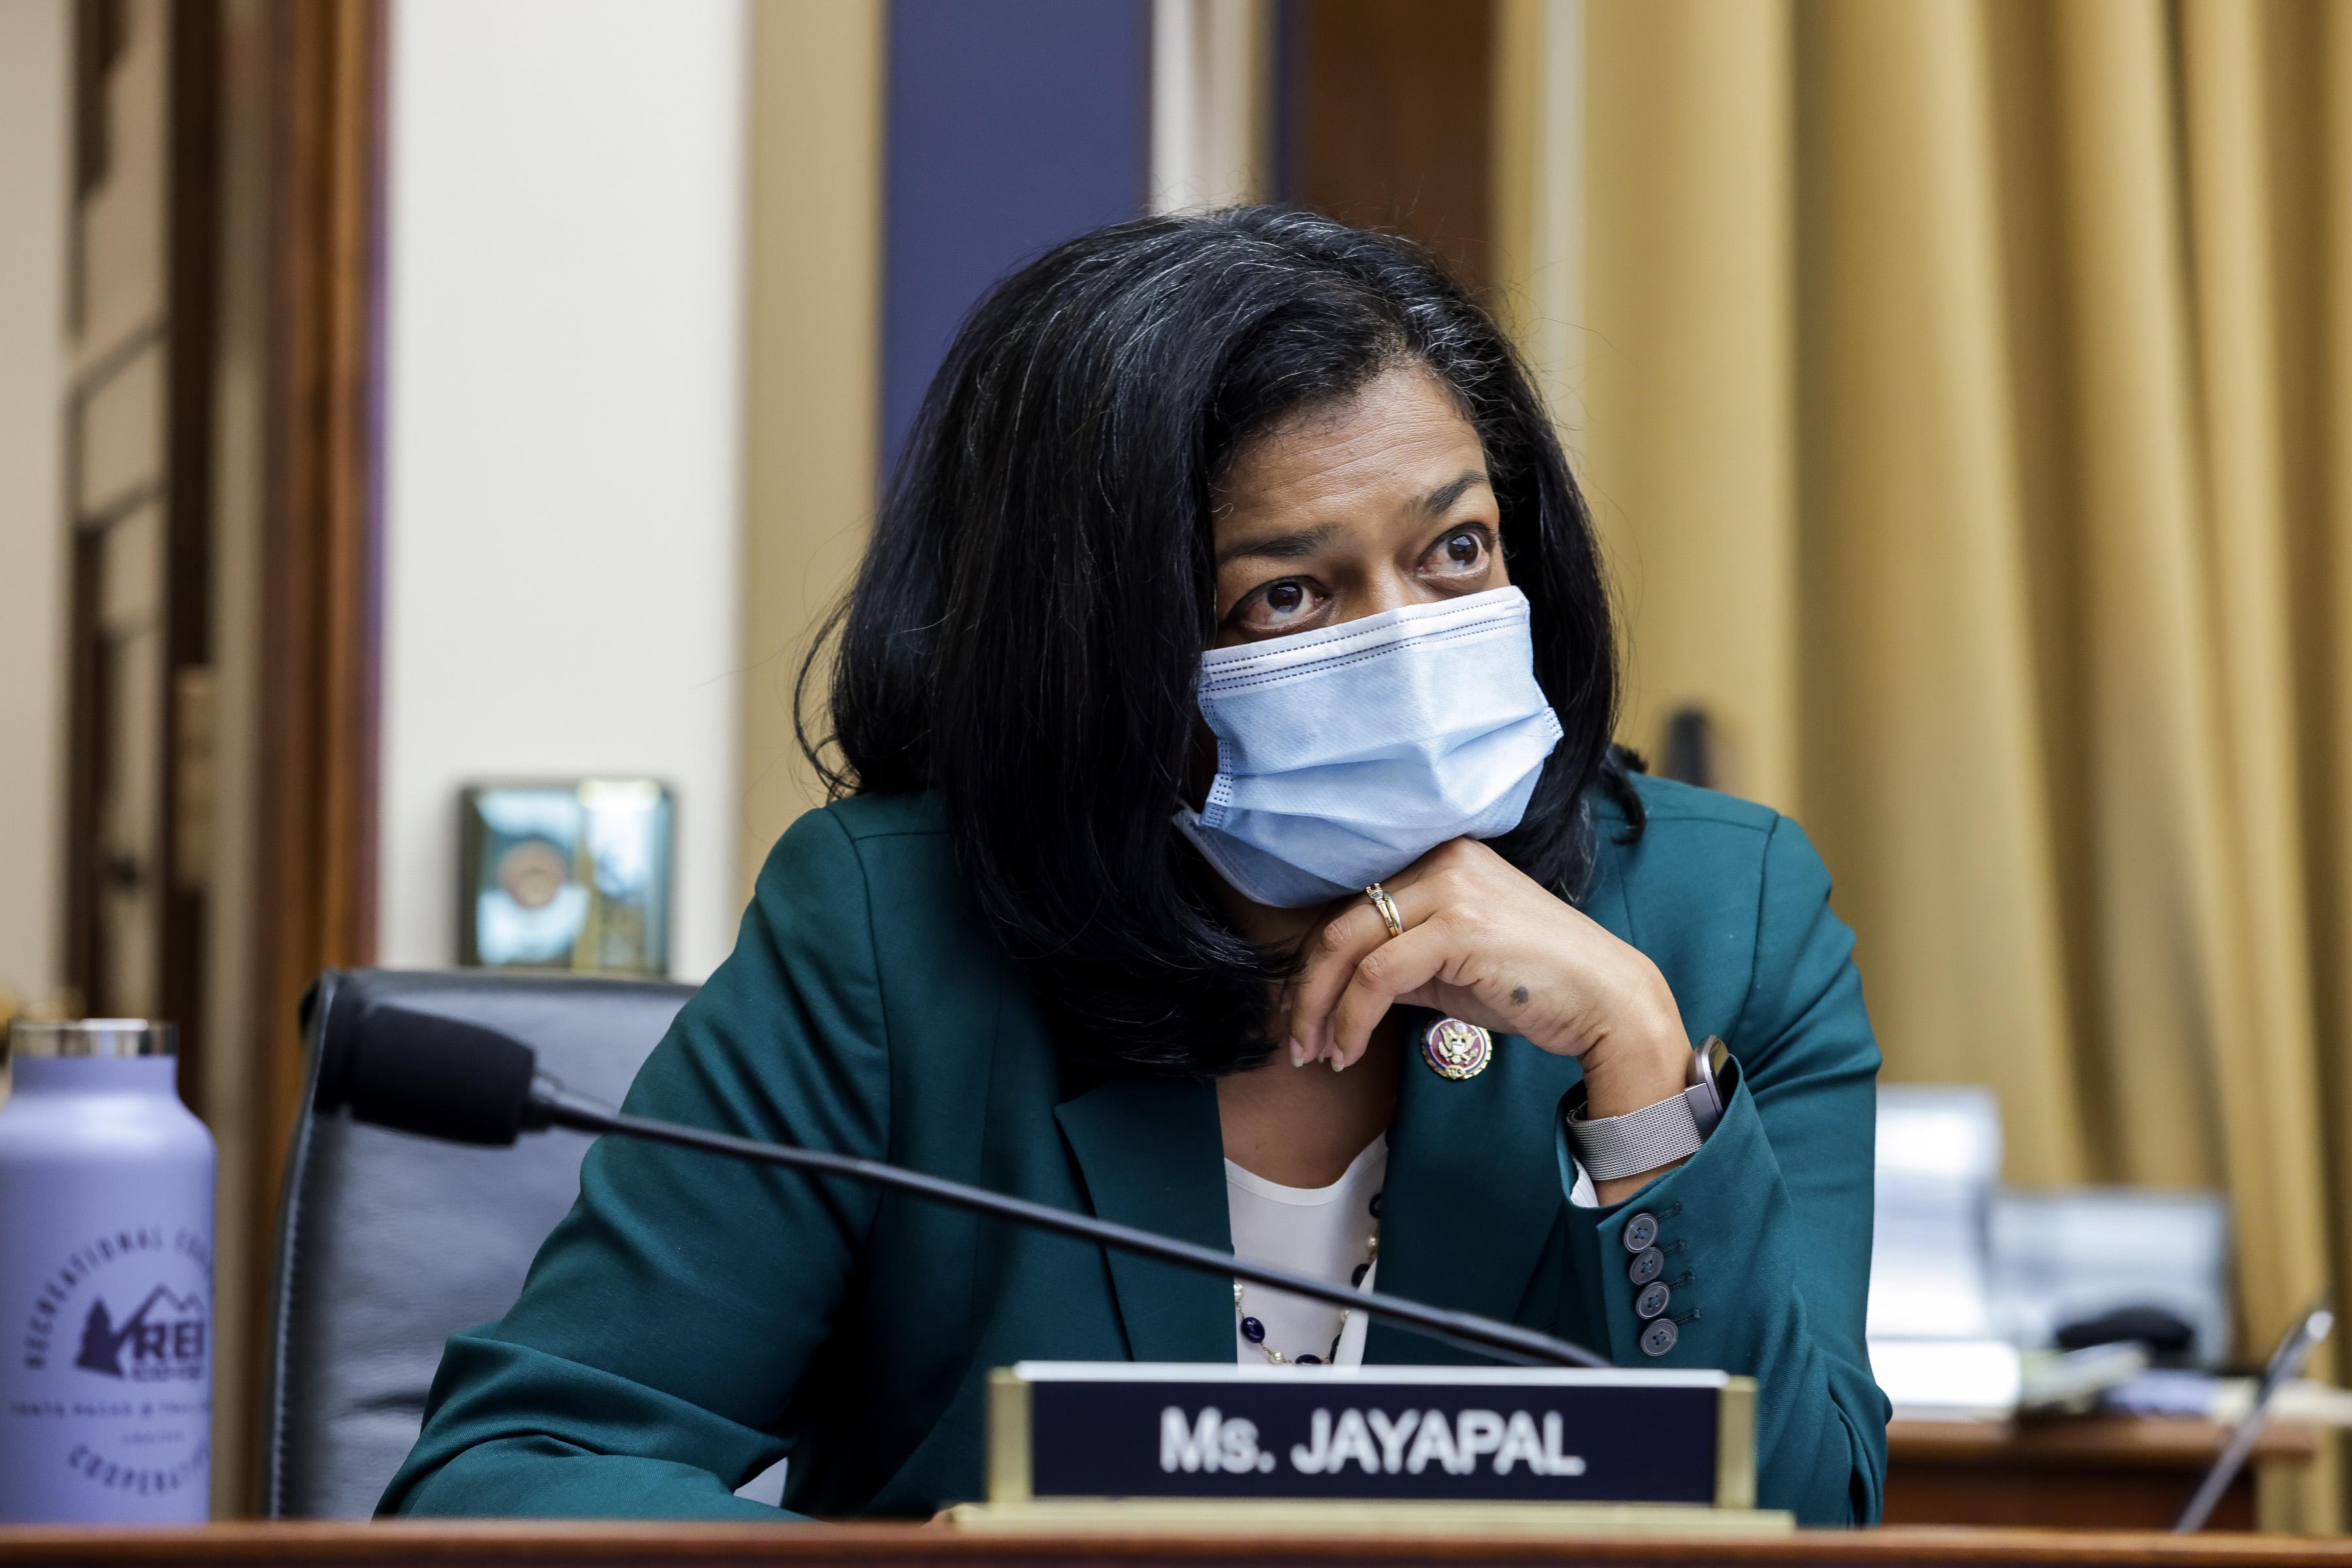 Jayapal wears a mask as she sits in a hearing room.